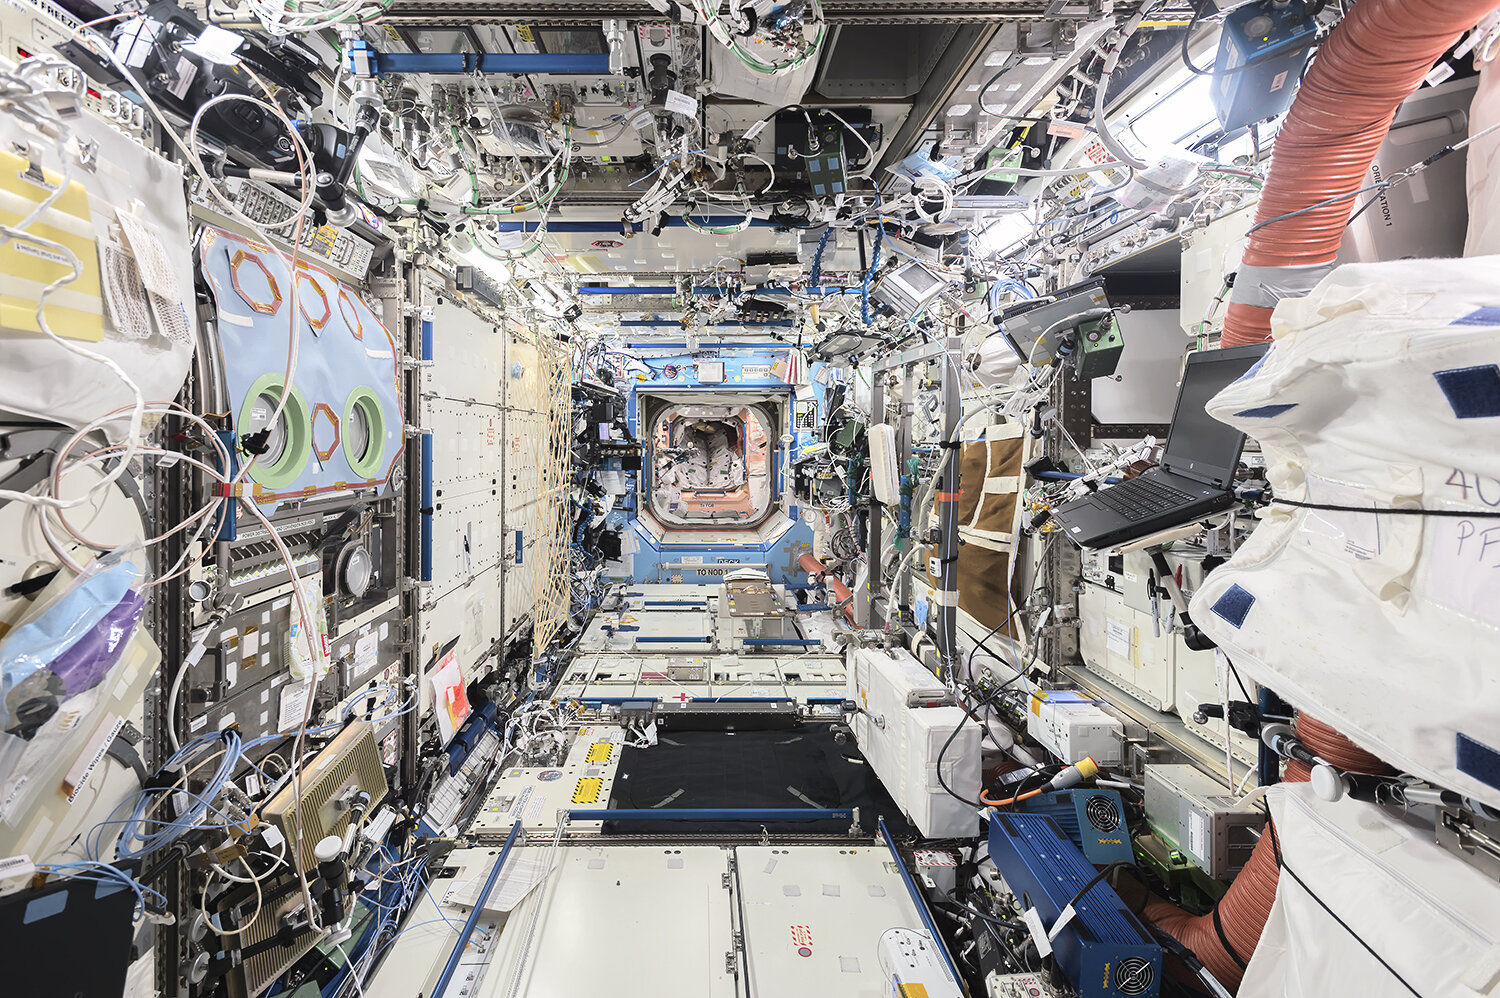 Longitudinal View, from ISS Forward to ISS Aft